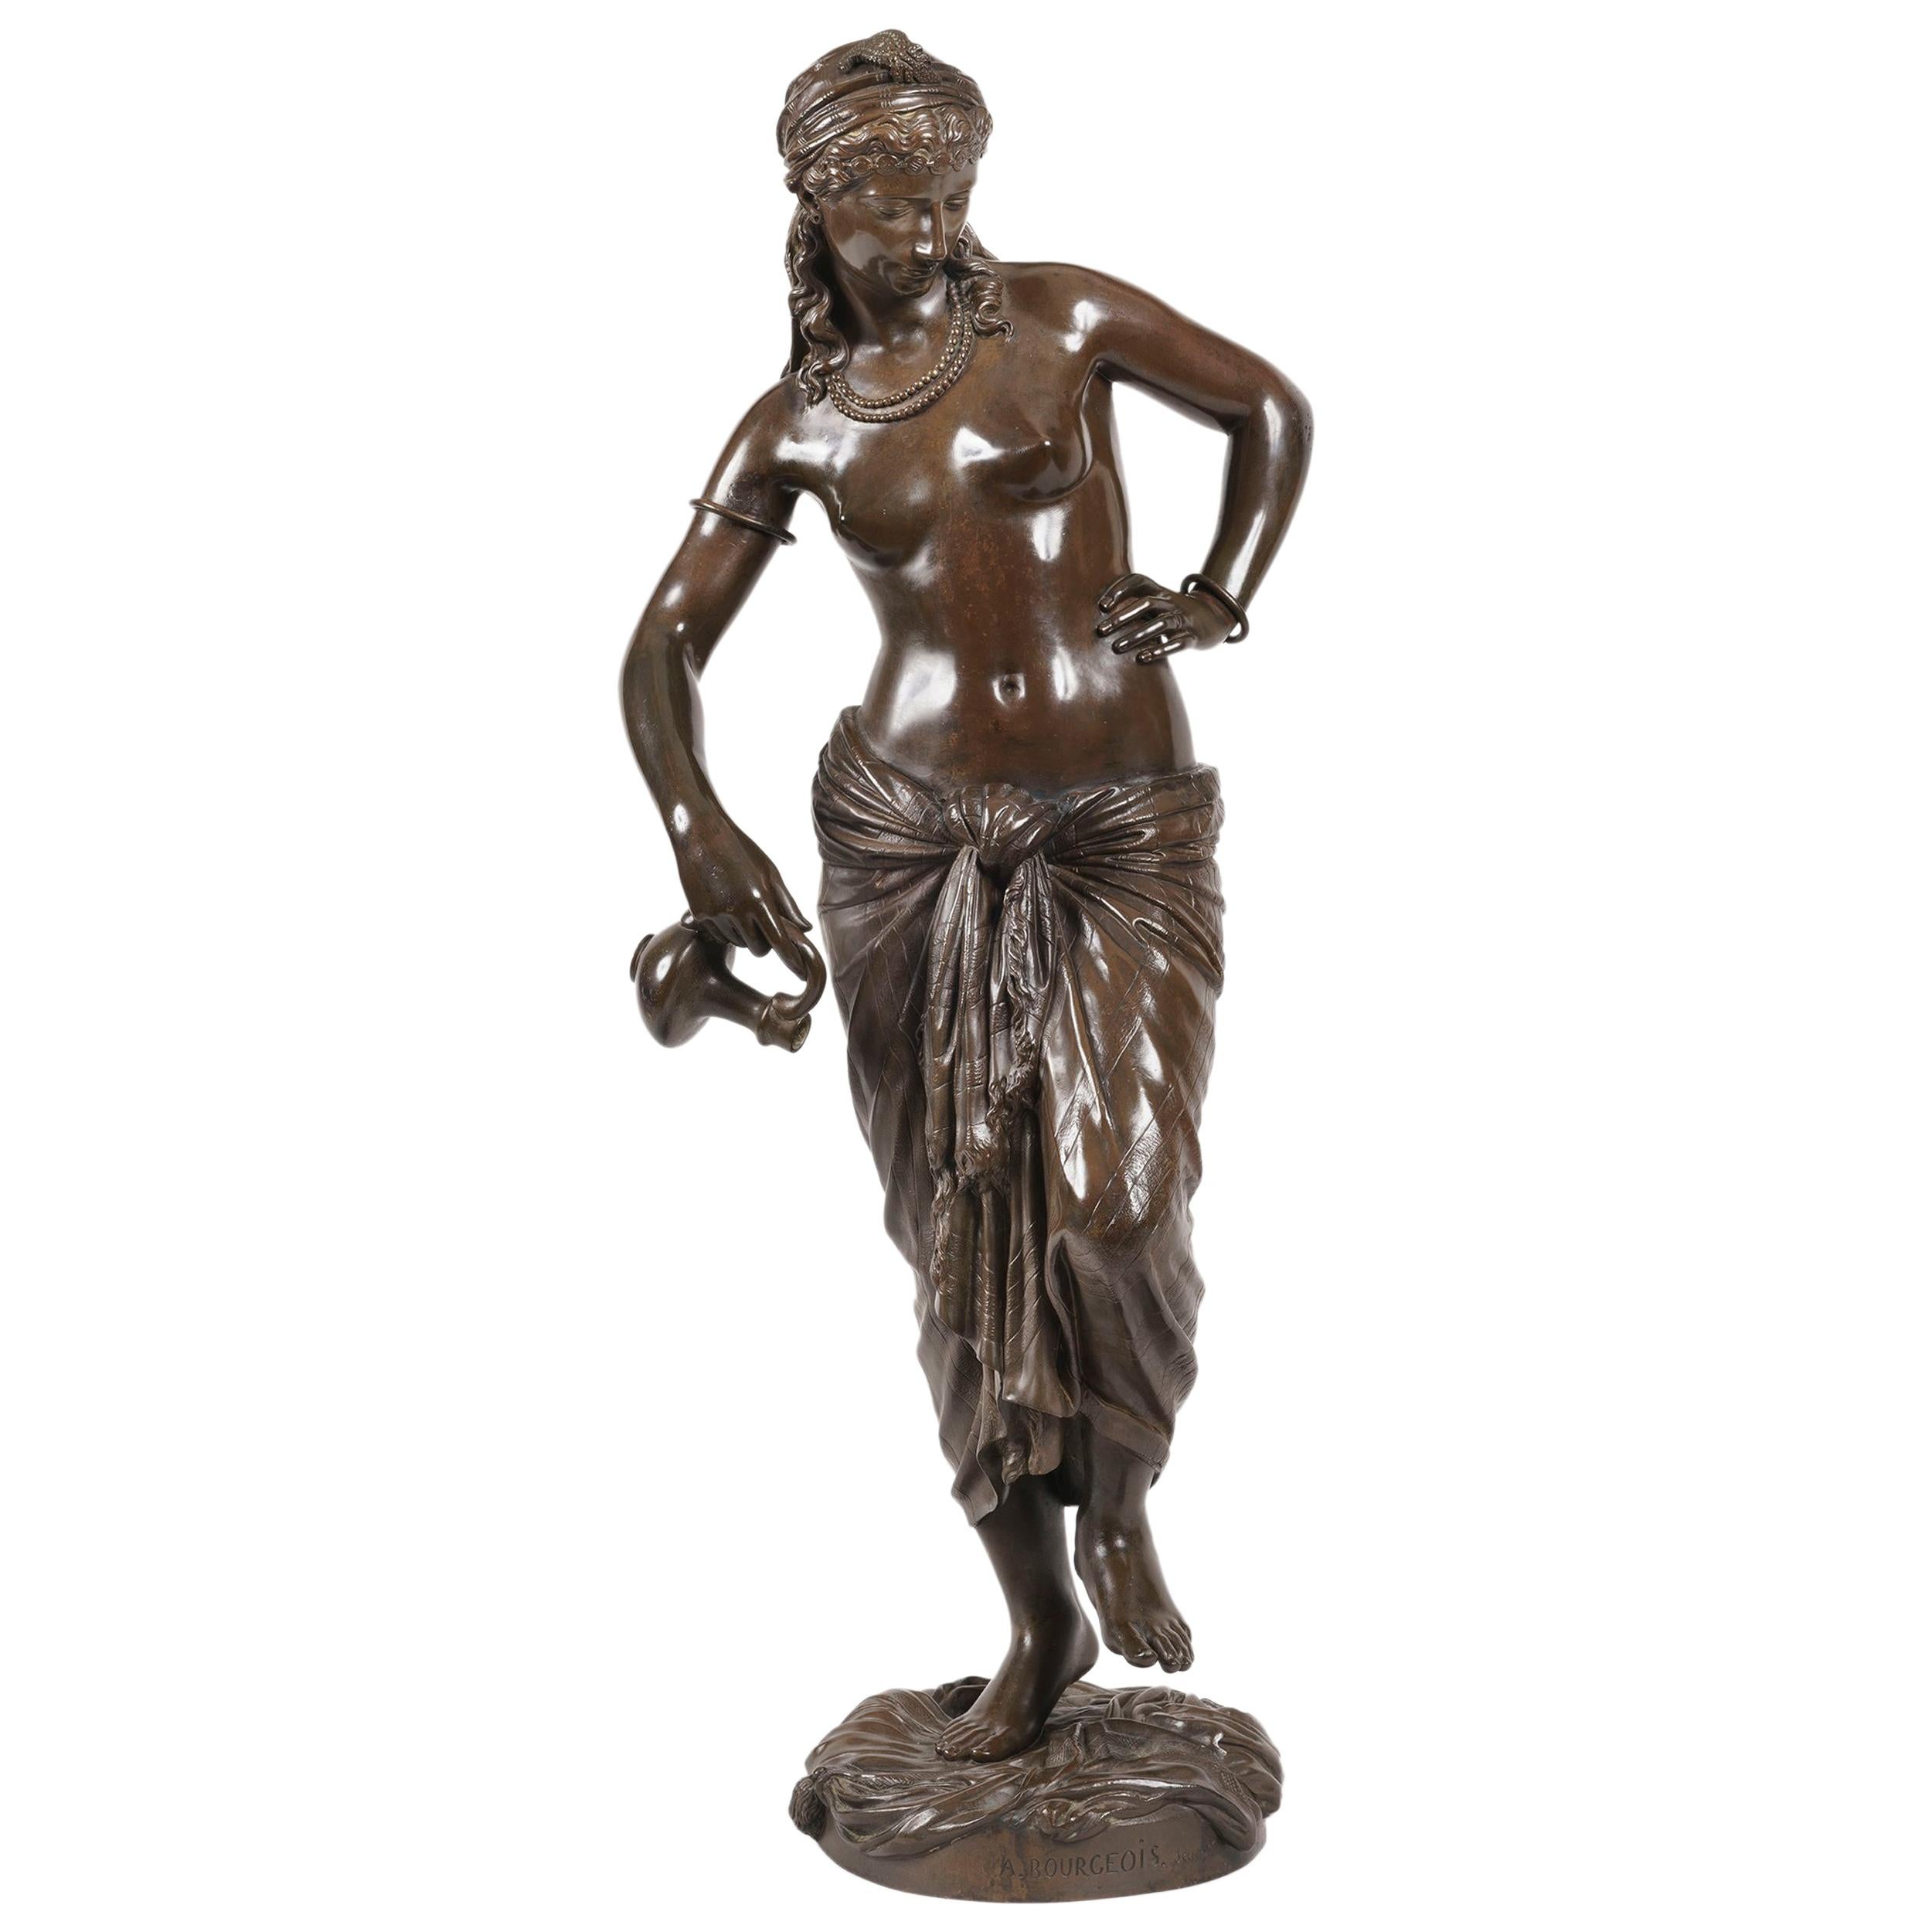 'Odalisque' by Baron Charles Arthur Bourgeois, a 19th Century Bronze Sculpture